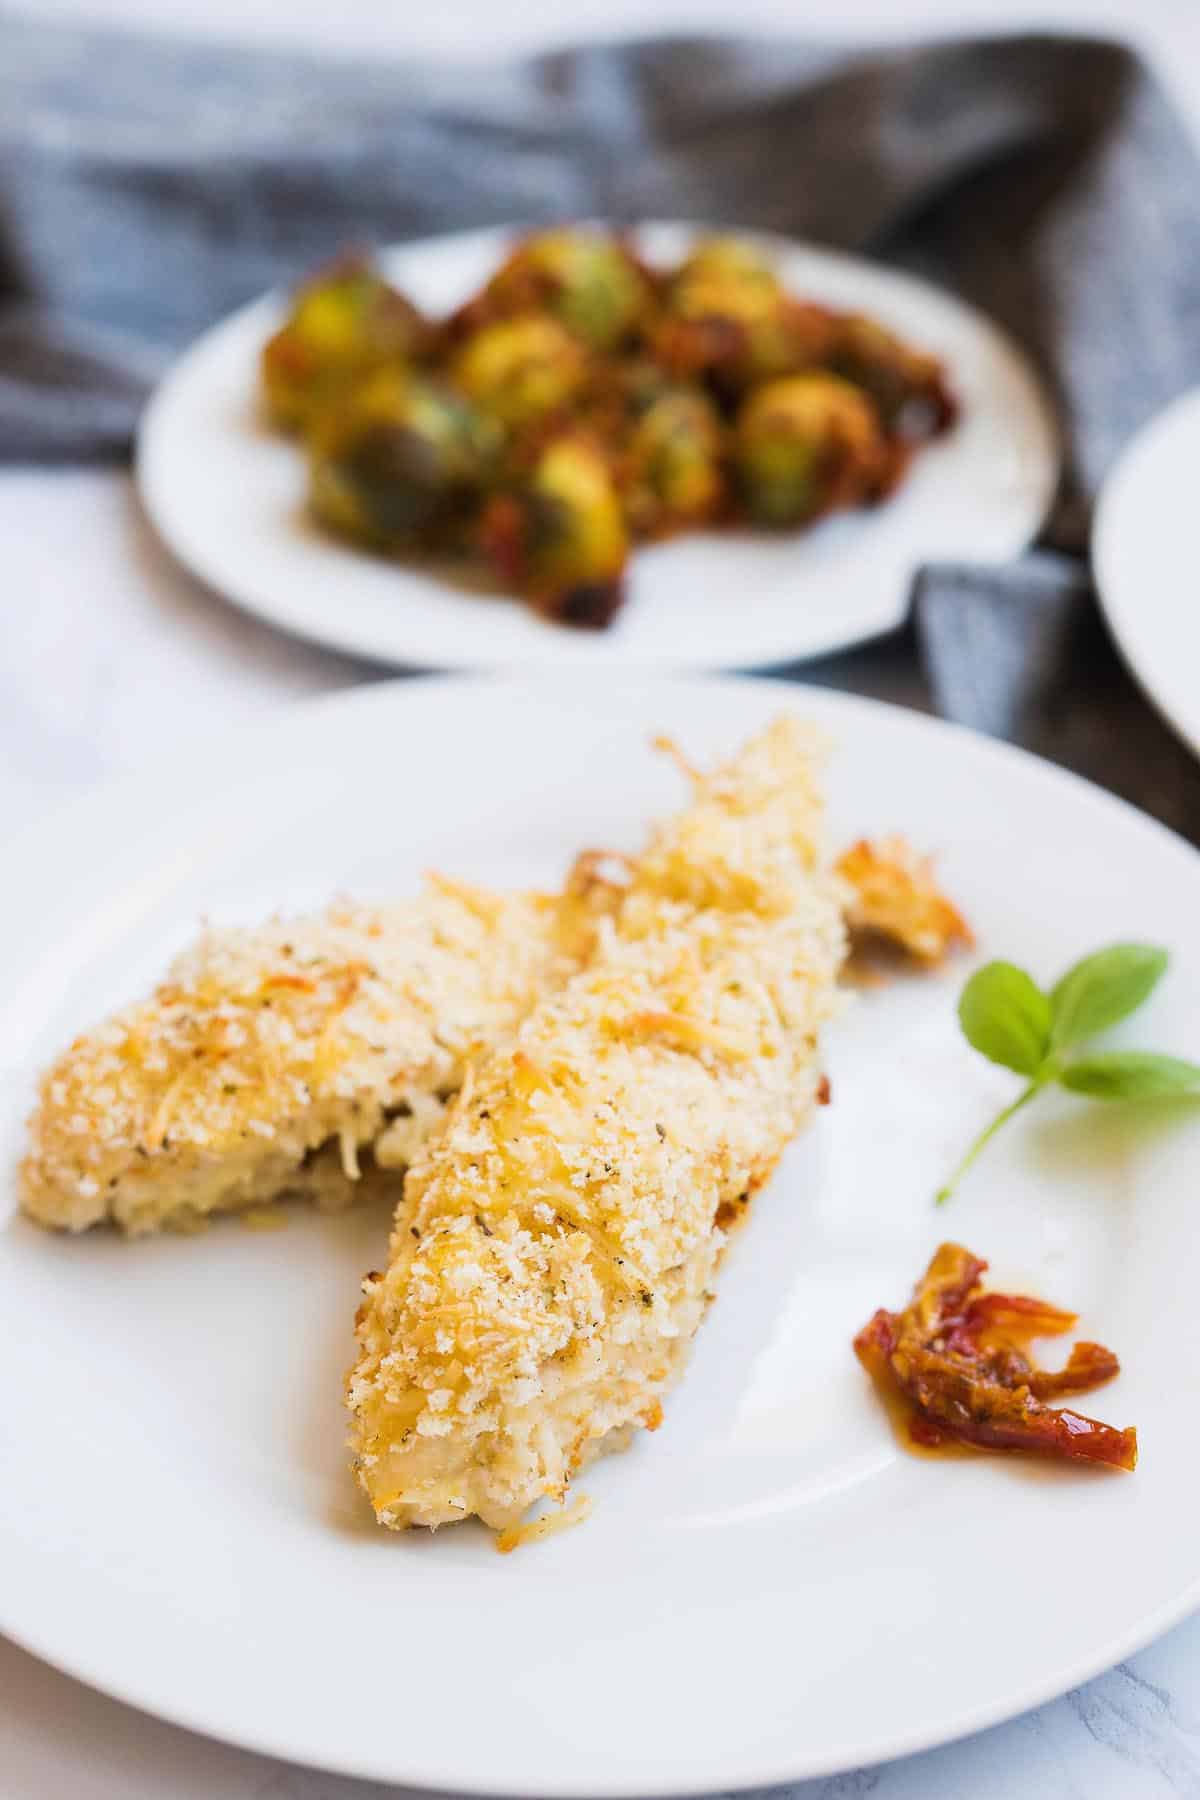 Need a quick dinner? Try this Cheesy Crunch Chicken & Italian Brussel Sprouts Bake! This dish comes together super simply and is cooked all in one dish. Can I get a hallelujah?! 